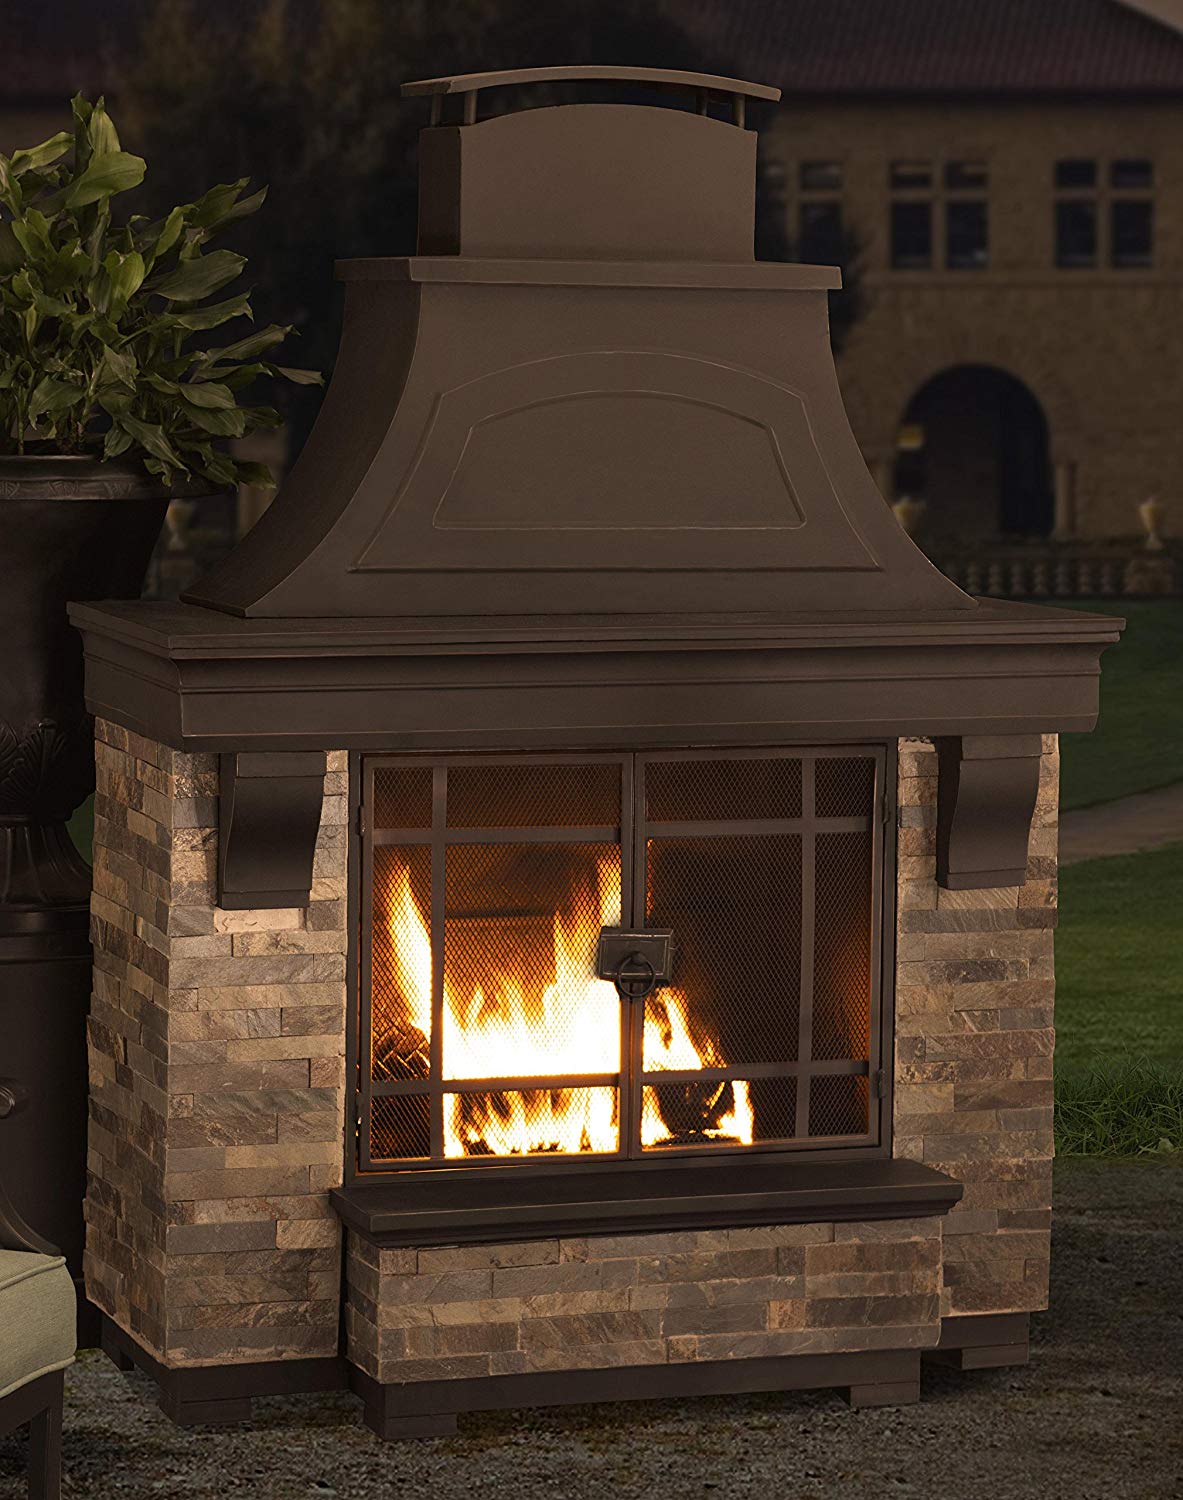 Outdoor Fireplace Kits: The Perfect Addition To Your Patio